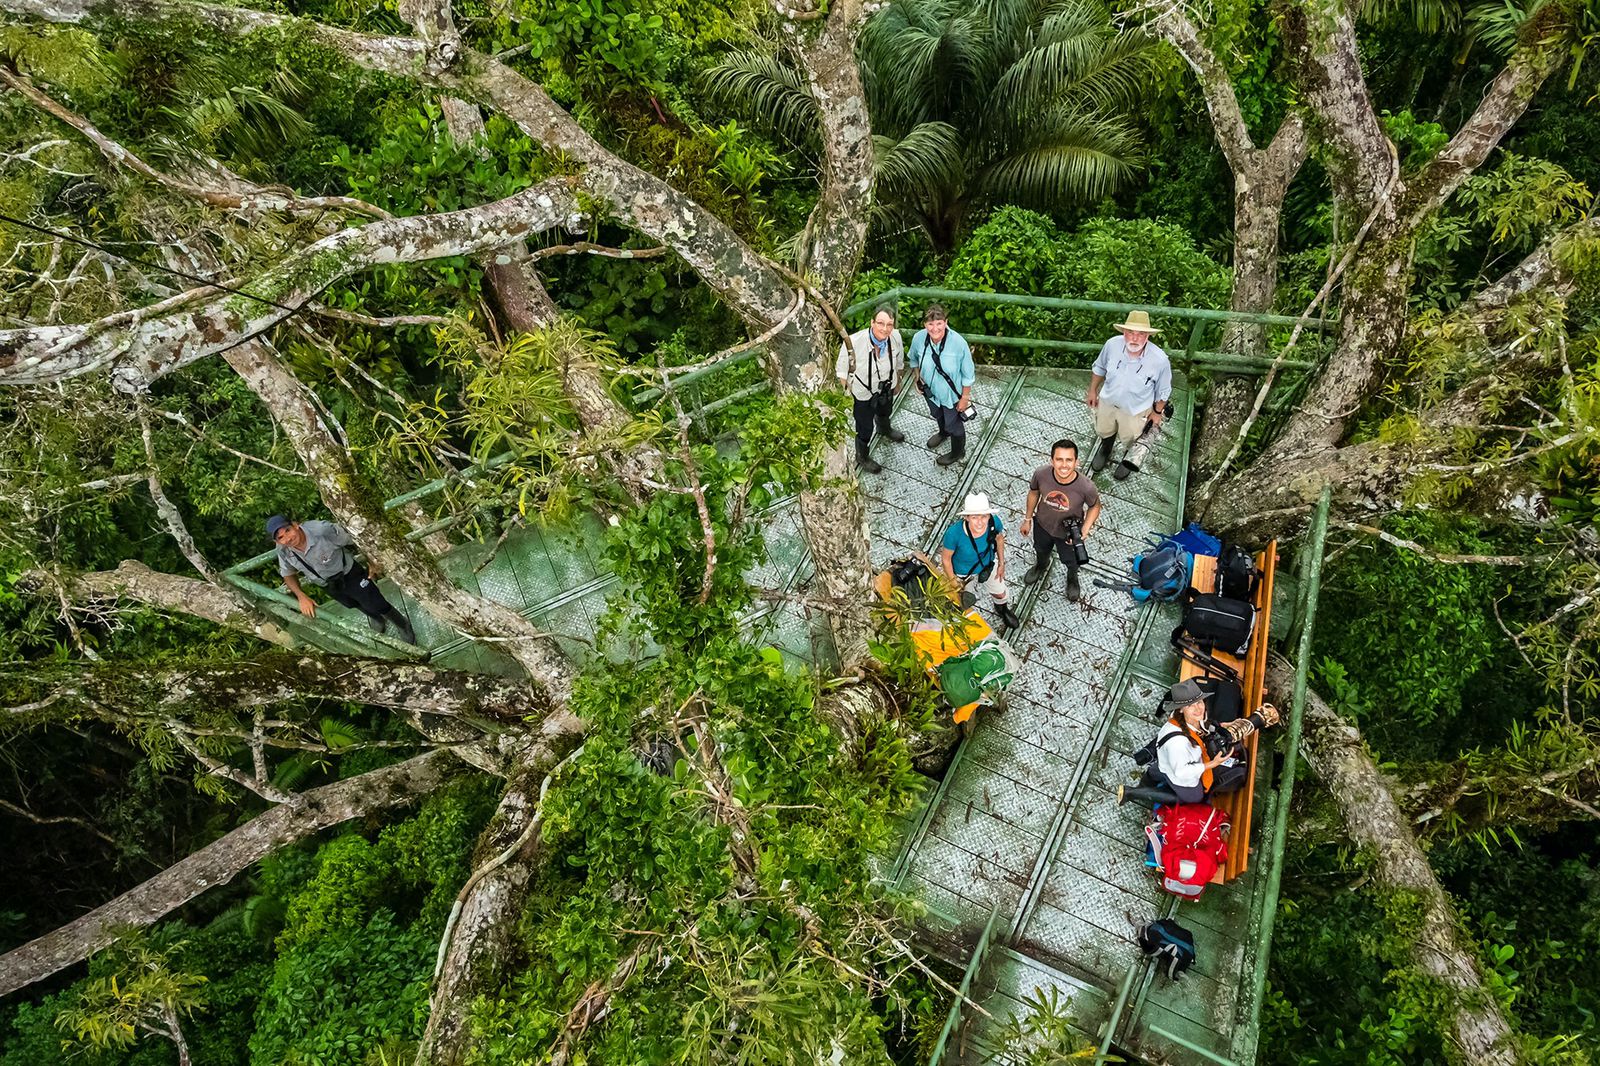 Our guests in the canopy tower at Napo wildlife center, Ecuadorian Amazon.